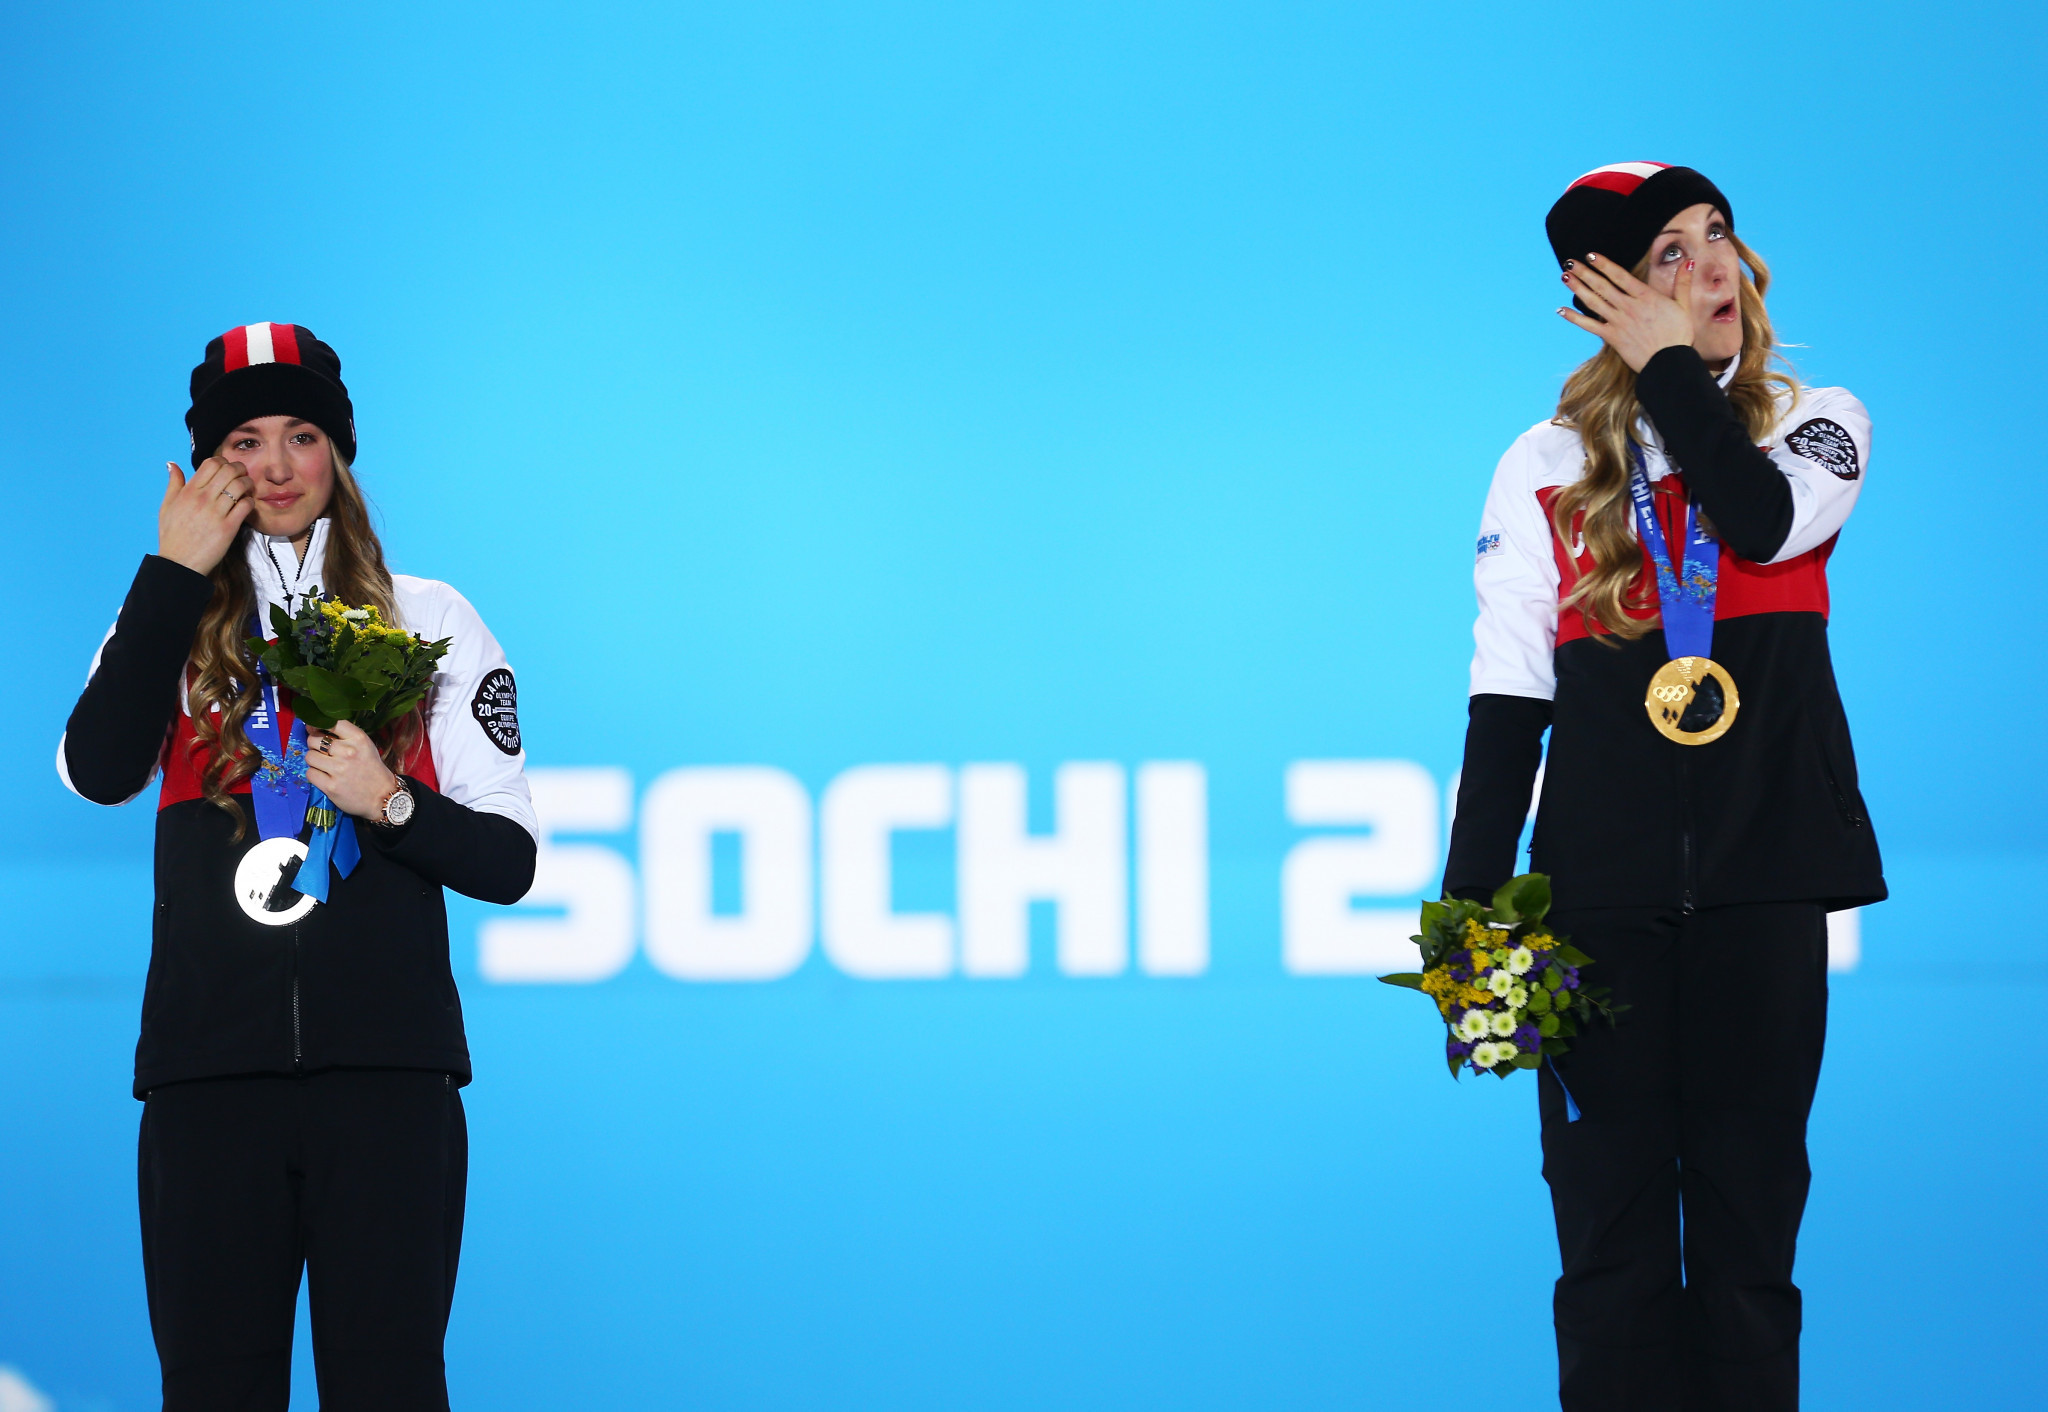 Chloé Dufour-Lapointe, left, won Olympic silver behind younger sister Justine at Sochi 2014 ©Getty Images